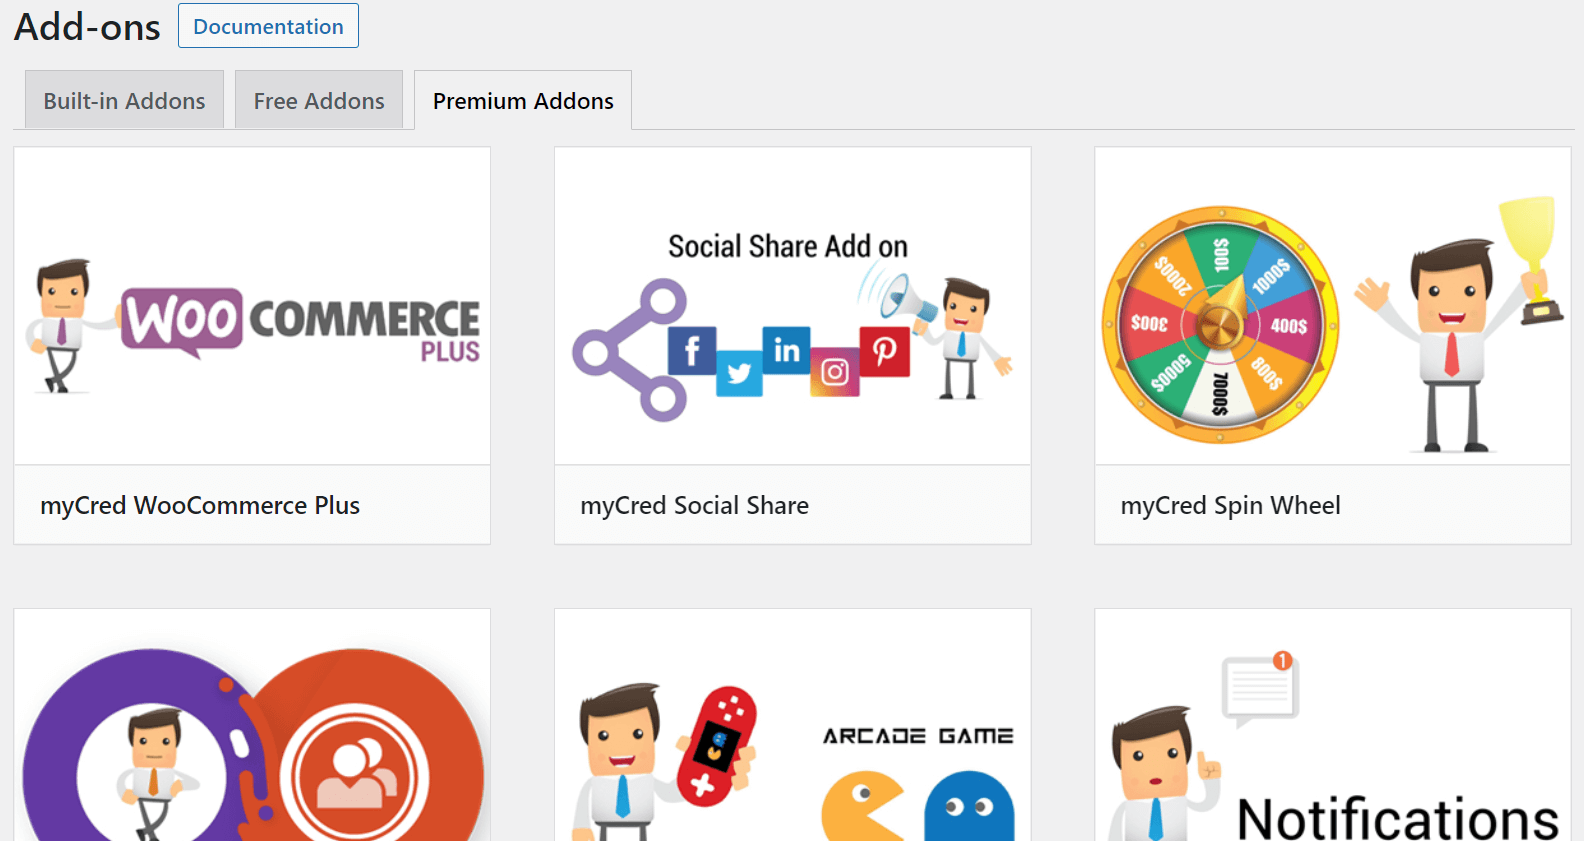 myCred add-ons